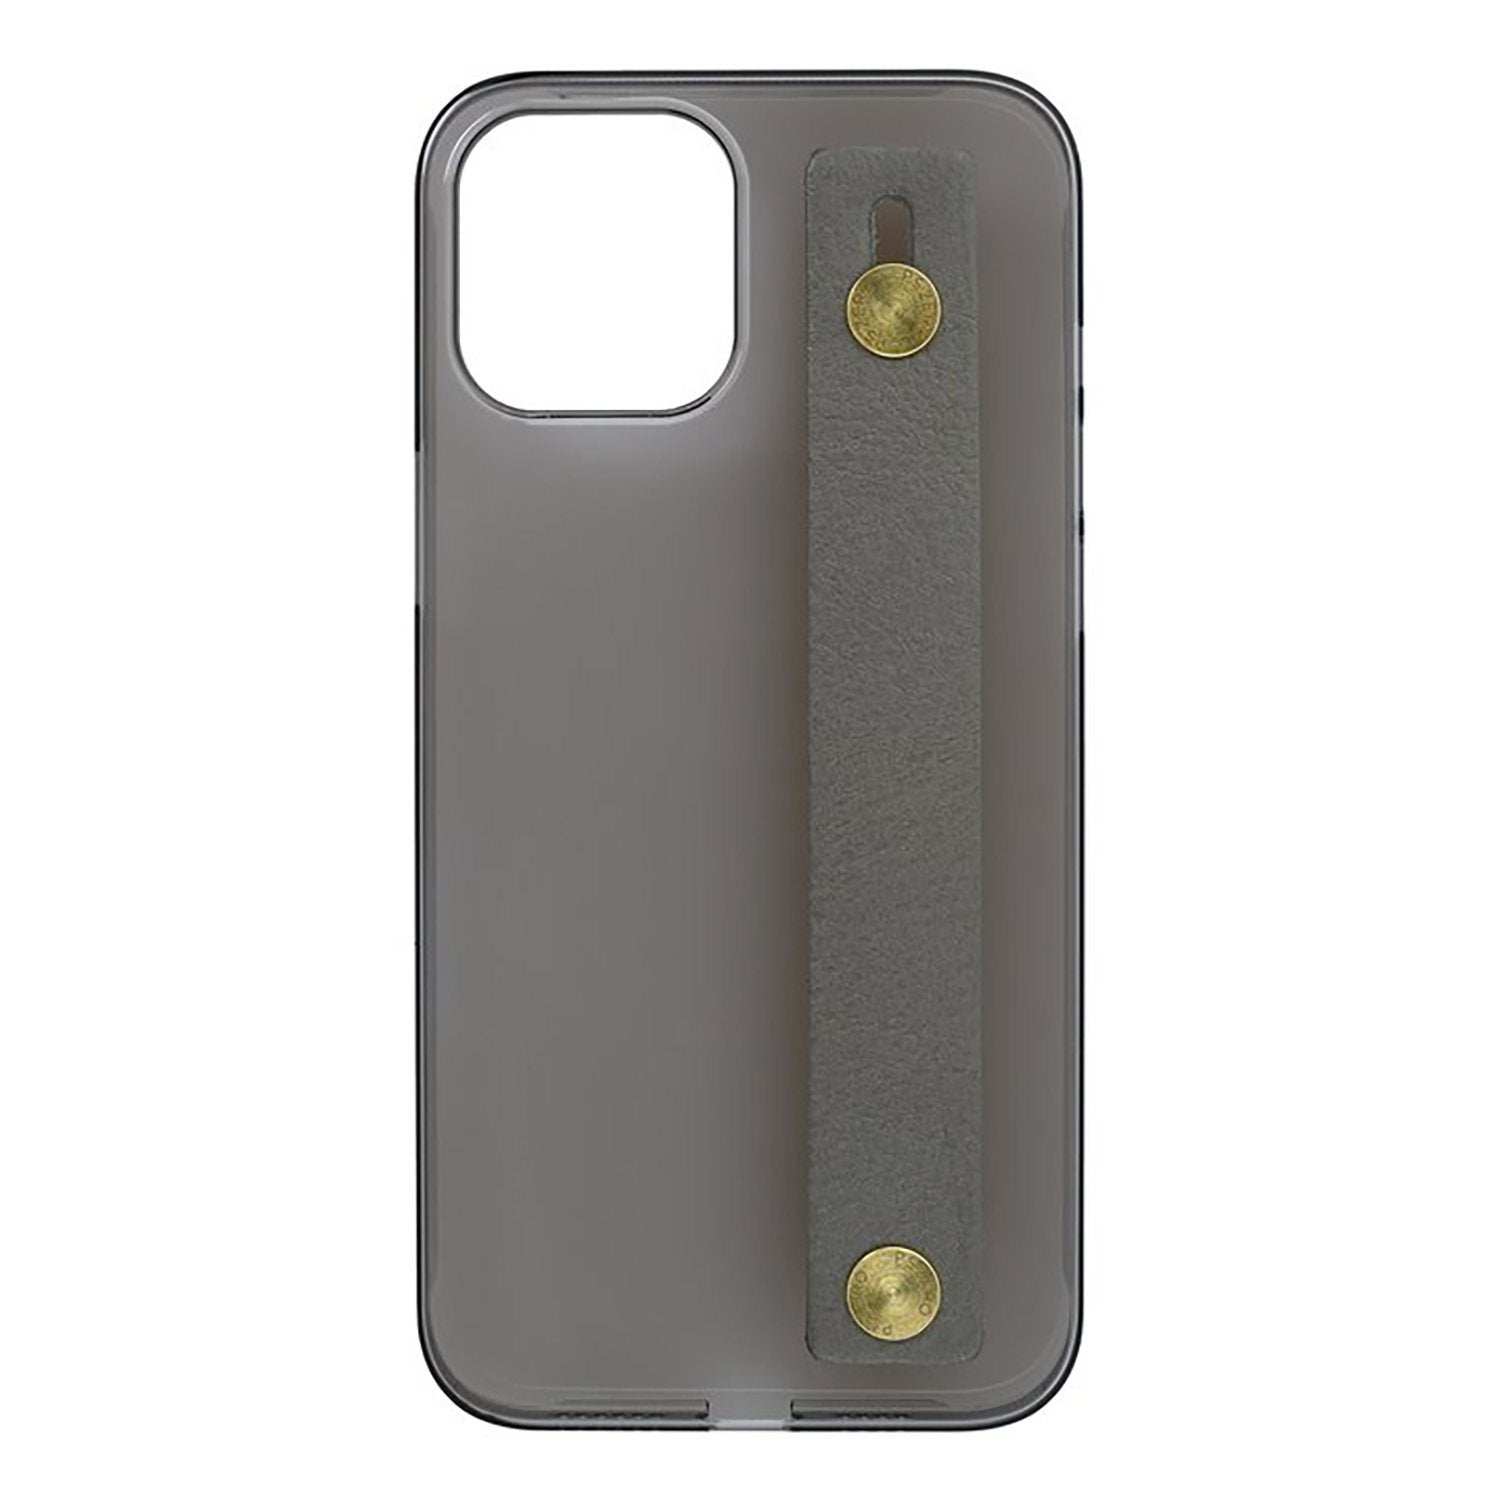 Power Support AirJacket Leather Band case for iPhone 12 Pro Max 6.7'', Gray Default Power Support 